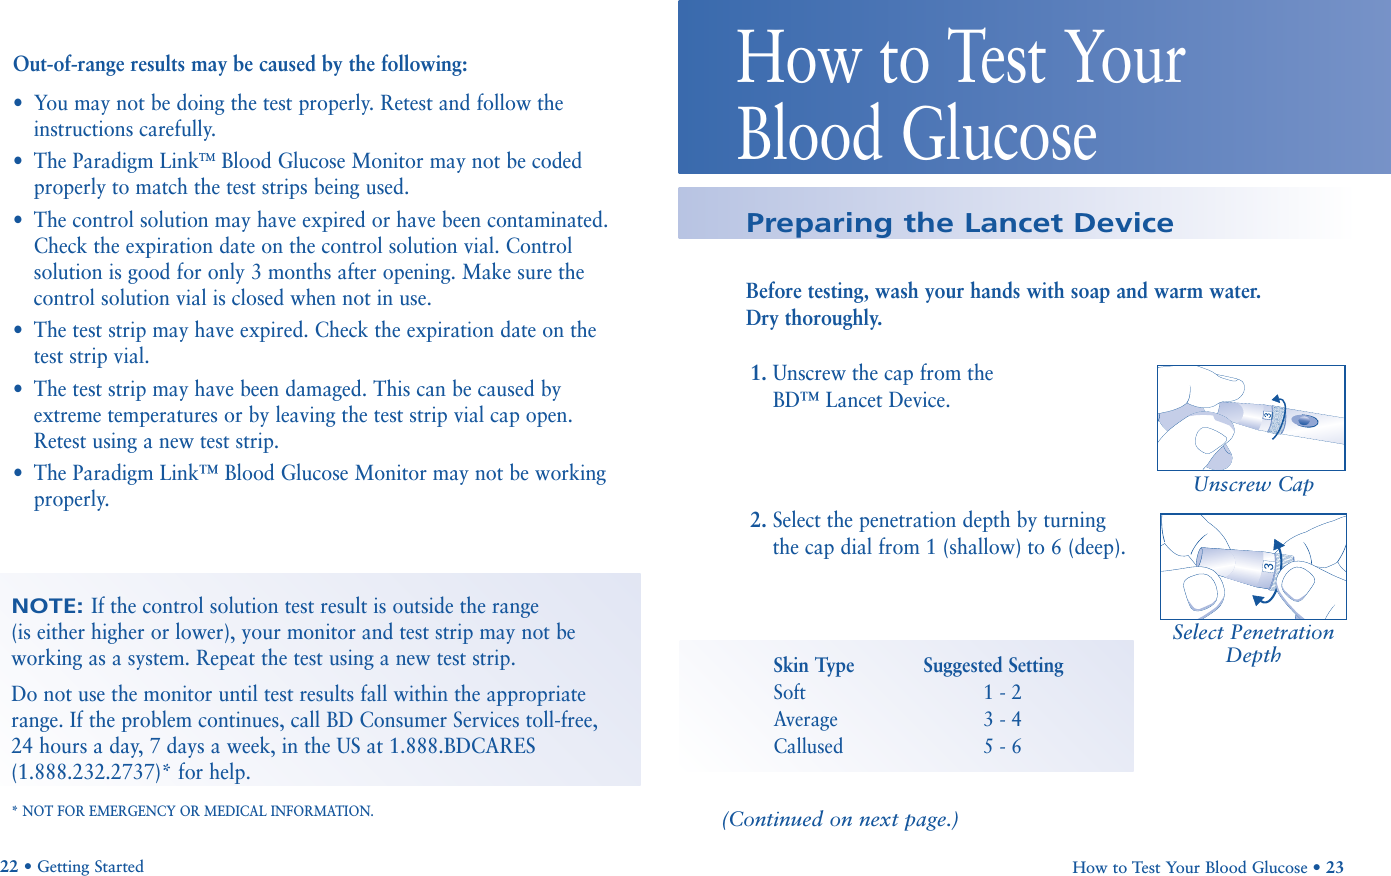 How to Test Your Blood Glucose • 23How to Test Your Blood GlucosePreparing the Lancet DeviceBefore testing, wash your hands with soap and warm water. Dry thoroughly.22 • Getting StartedOut-of-range results may be caused by the following:•You may not be doing the test properly. Retest and follow theinstructions carefully.•The Paradigm LinkTMBlood Glucose Monitor may not be codedproperly to match the test strips being used.•The control solution may have expired or have been contaminated.Check the expiration date on the control solution vial. Controlsolution is good for only 3 months after opening. Make sure thecontrol solution vial is closed when not in use.•The test strip may have expired. Check the expiration date on thetest strip vial.•The test strip may have been damaged. This can be caused byextreme temperatures or by leaving the test strip vial cap open.Retest using a new test strip.•The Paradigm Link™ Blood Glucose Monitor may not be workingproperly.NOTE: If the control solution test result is outside the range (is either higher or lower), your monitor and test strip may not beworking as a system. Repeat the test using a new test strip. Do not use the monitor until test results fall within the appropriaterange. If the problem continues, call BD Consumer Services toll-free, 24 hours a day, 7 days a week, in the US at 1.888.BDCARES(1.888.232.2737)* for help.* NOT FOR EMERGENCY OR MEDICAL INFORMATION.1. Unscrew the cap from the BD™ Lancet Device.2. Select the penetration depth by turningthe cap dial from 1 (shallow) to 6 (deep).Unscrew CapSelect PenetrationDepthSkin Type Suggested SettingSoft 1 - 2Average 3 - 4Callused 5 - 6(Continued on next page.)